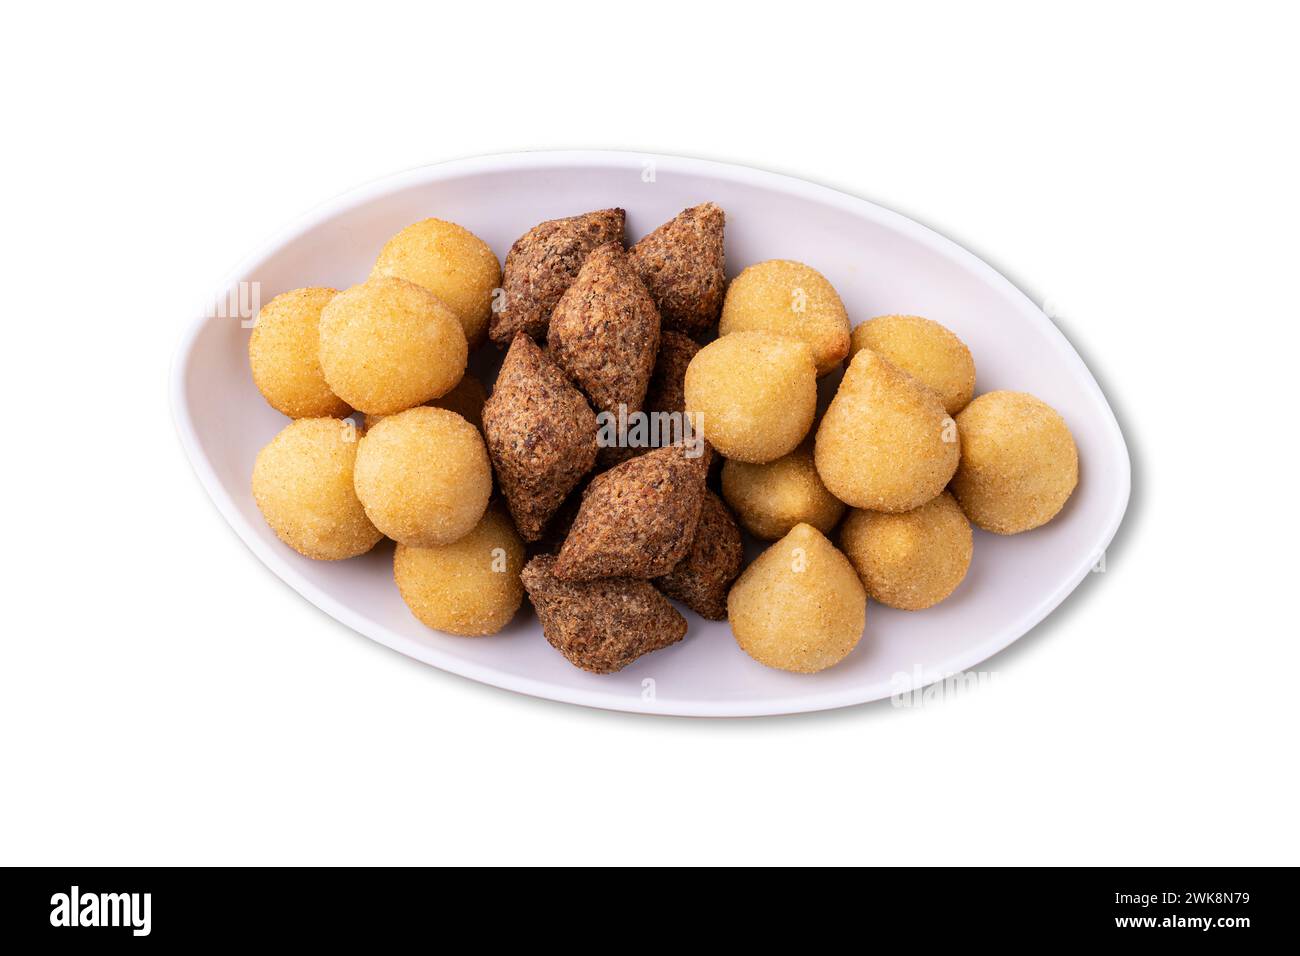 Coxinha, kibbeh and cheese balls, typical brazilian snacks isolated over white background. Stock Photo